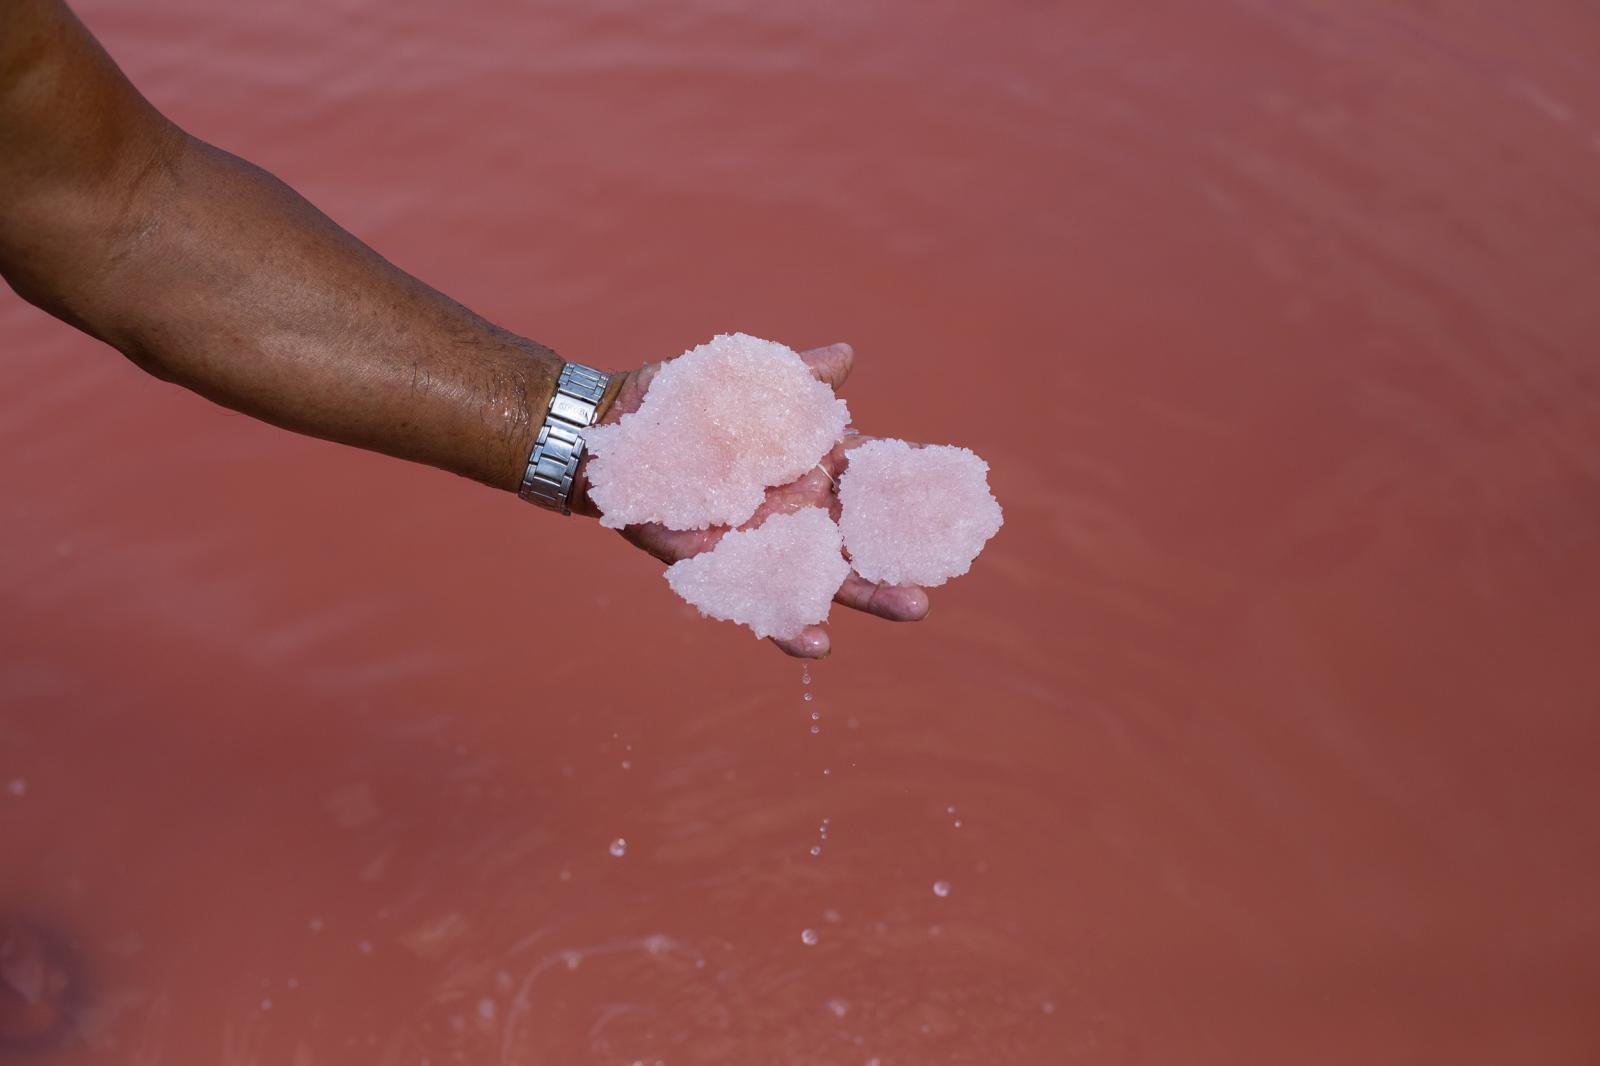 A worker shows salt blocks inside a pond in Xtamp&uacute;, Yucat&aacute;n state, Mexico, on Saturday, October 26, 2019. Photographer: Koral Carballo/Bloomberg